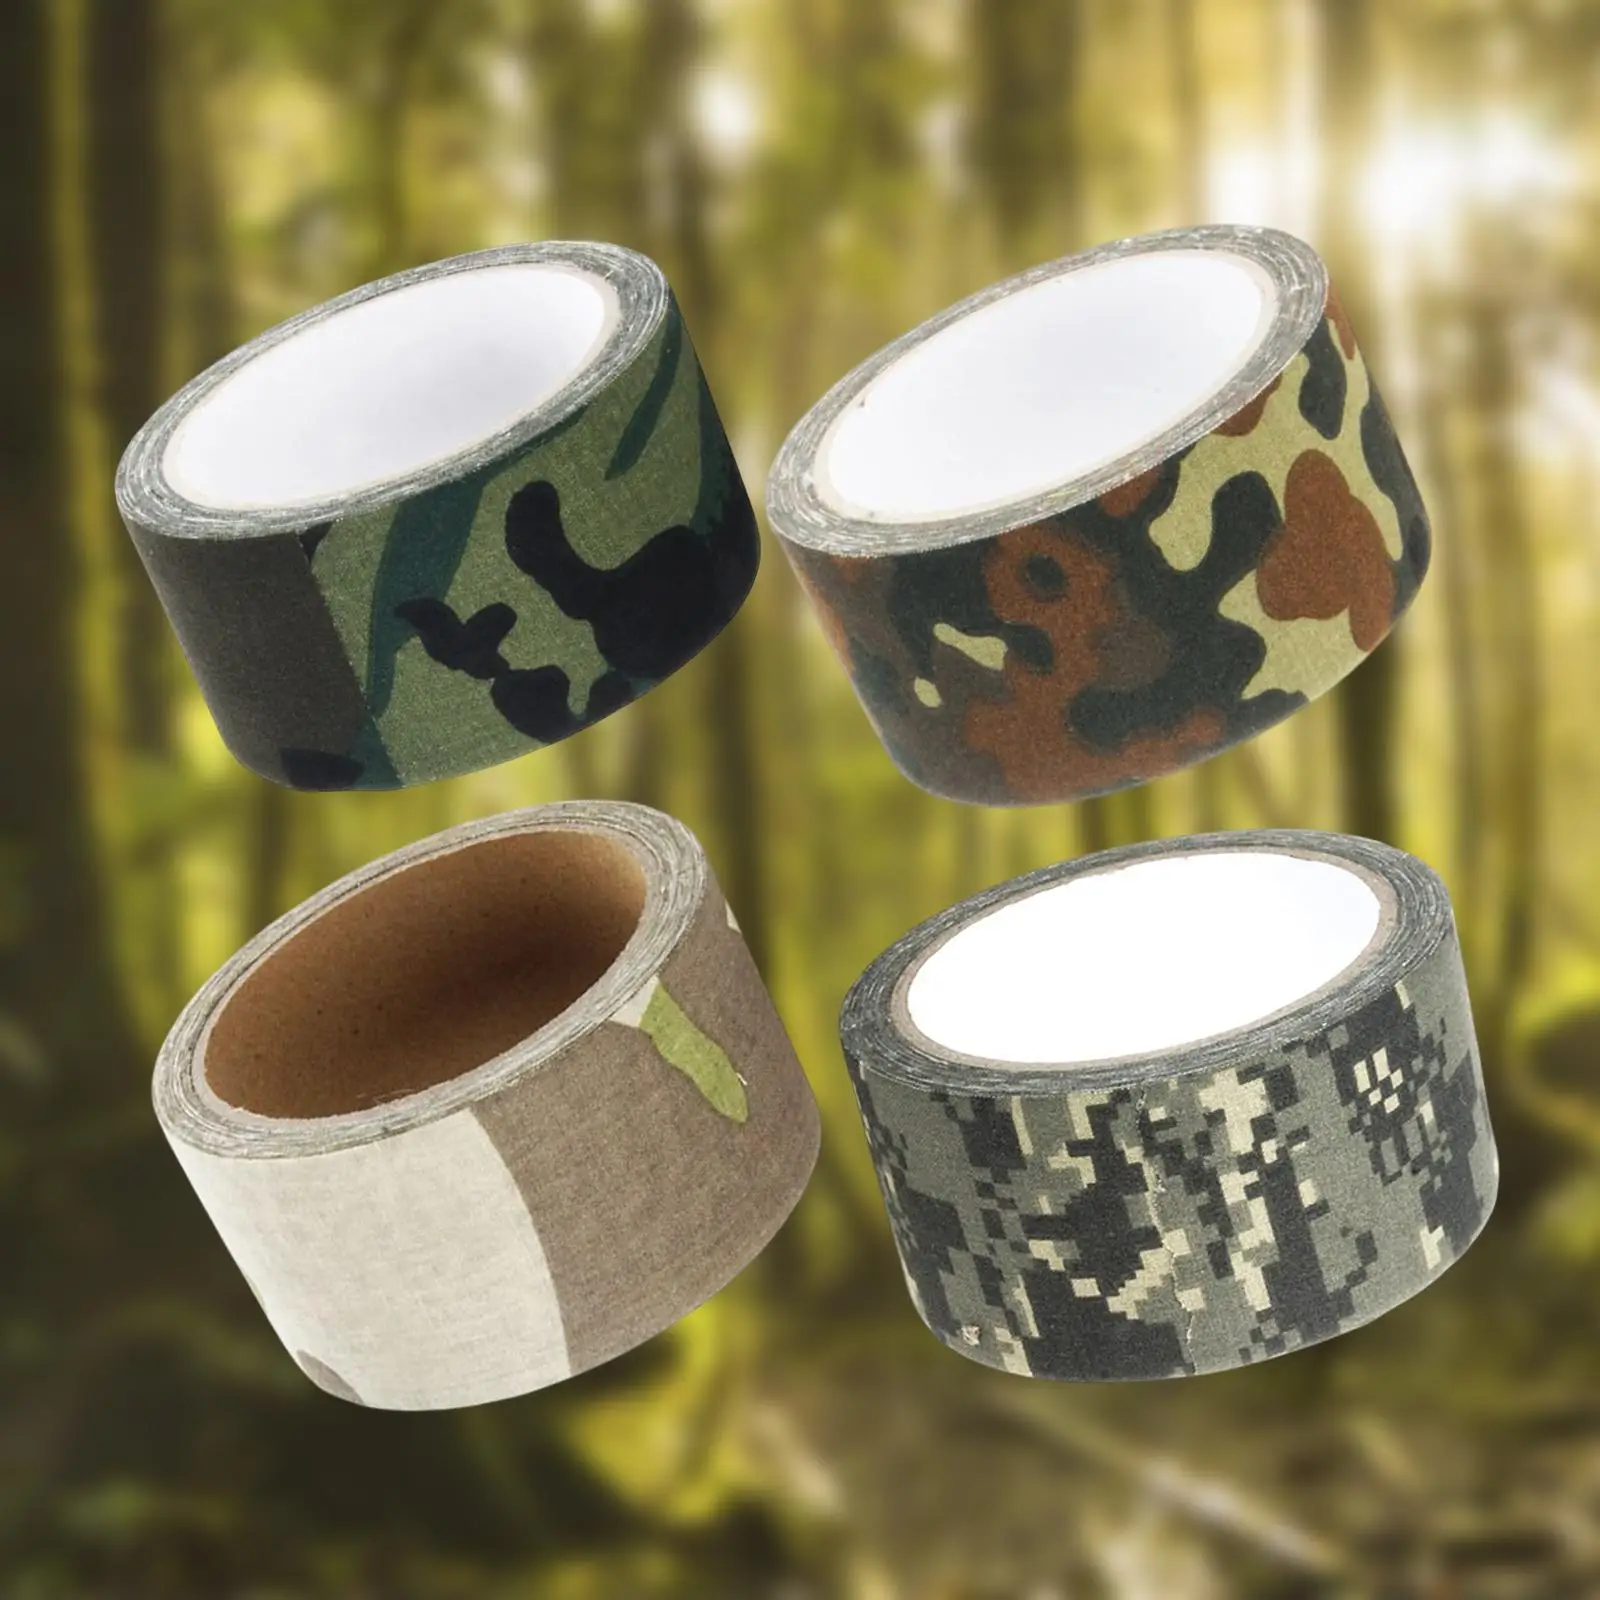 Self Adhesive Tape Wrap Tape 1 Roll 10 Meter Long Self Adhesive Bandage for hunting Hiking Wildlife Photography Camping